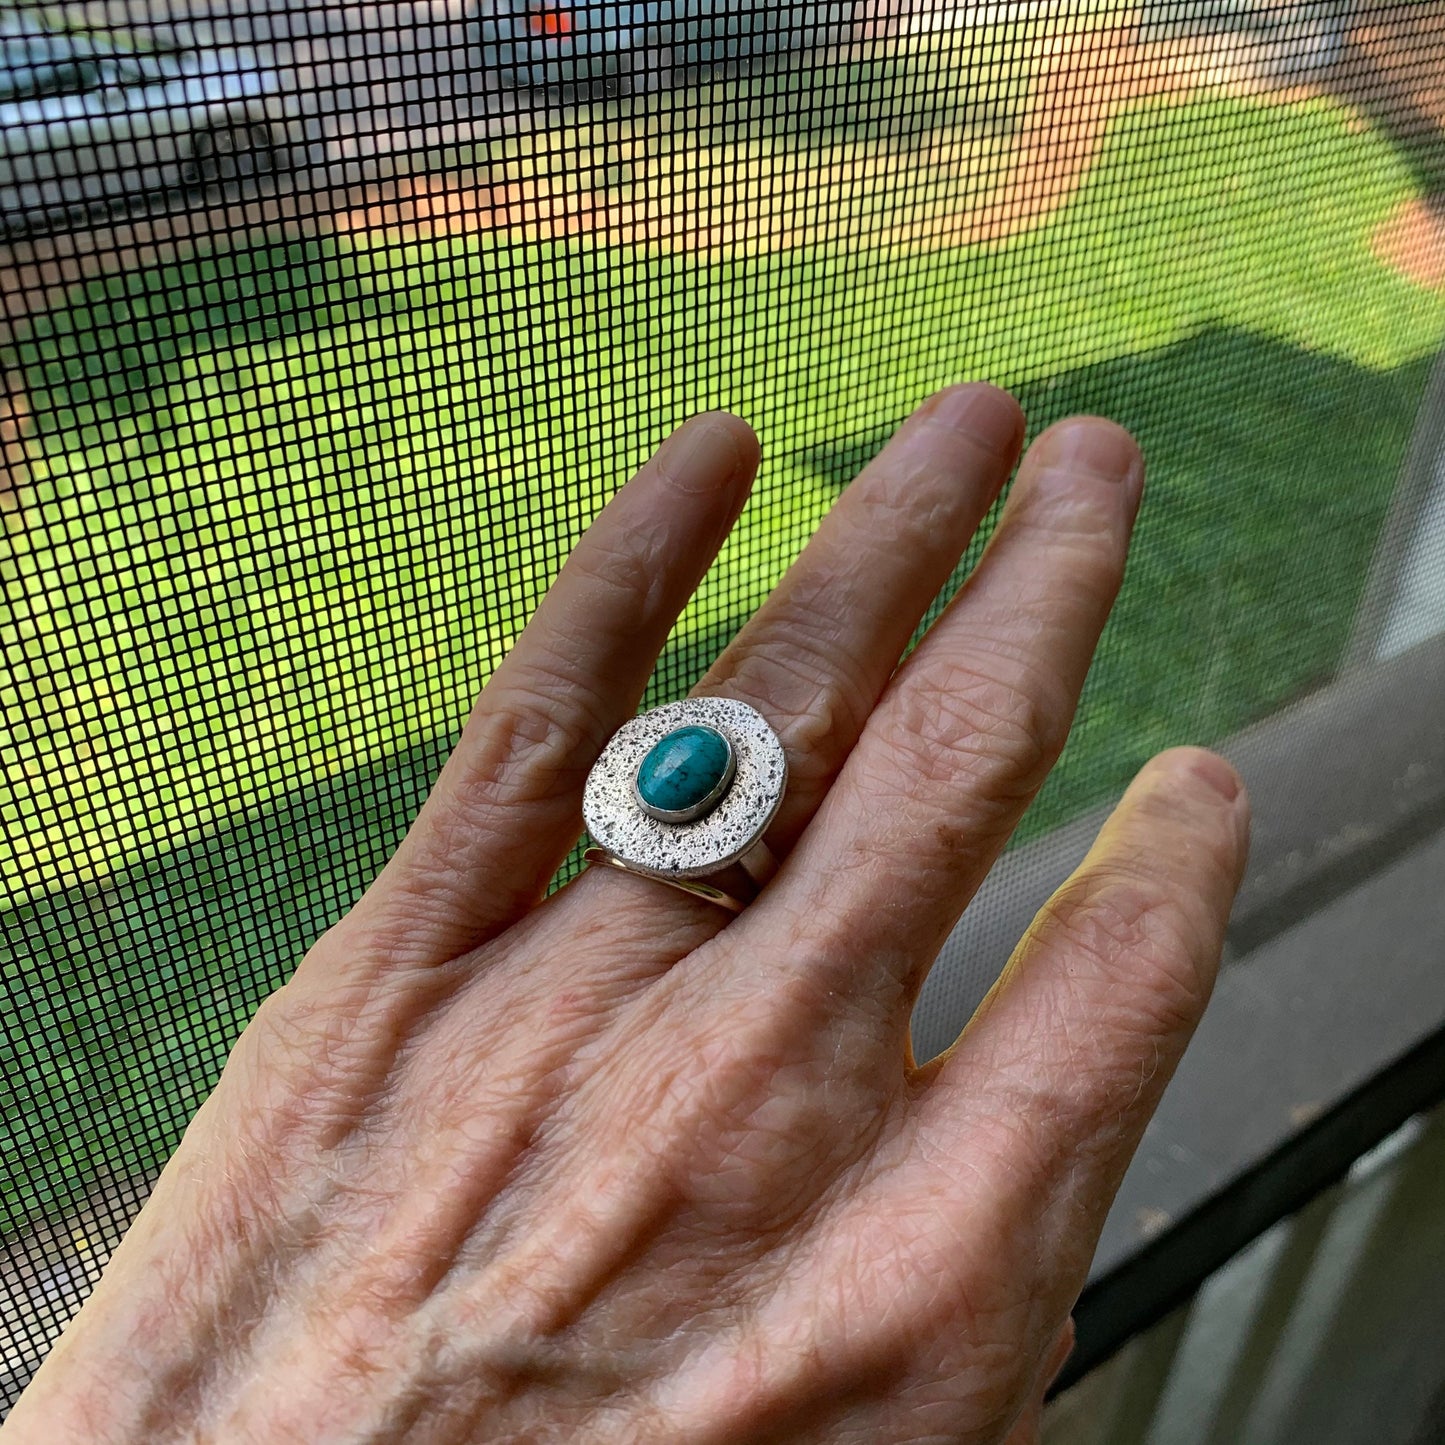 Turquoise ring - statement ring size 7-1/2 - silver and turquoise ring - handmade one-of-a-kind jewelry - modern boho style - unique &unisex